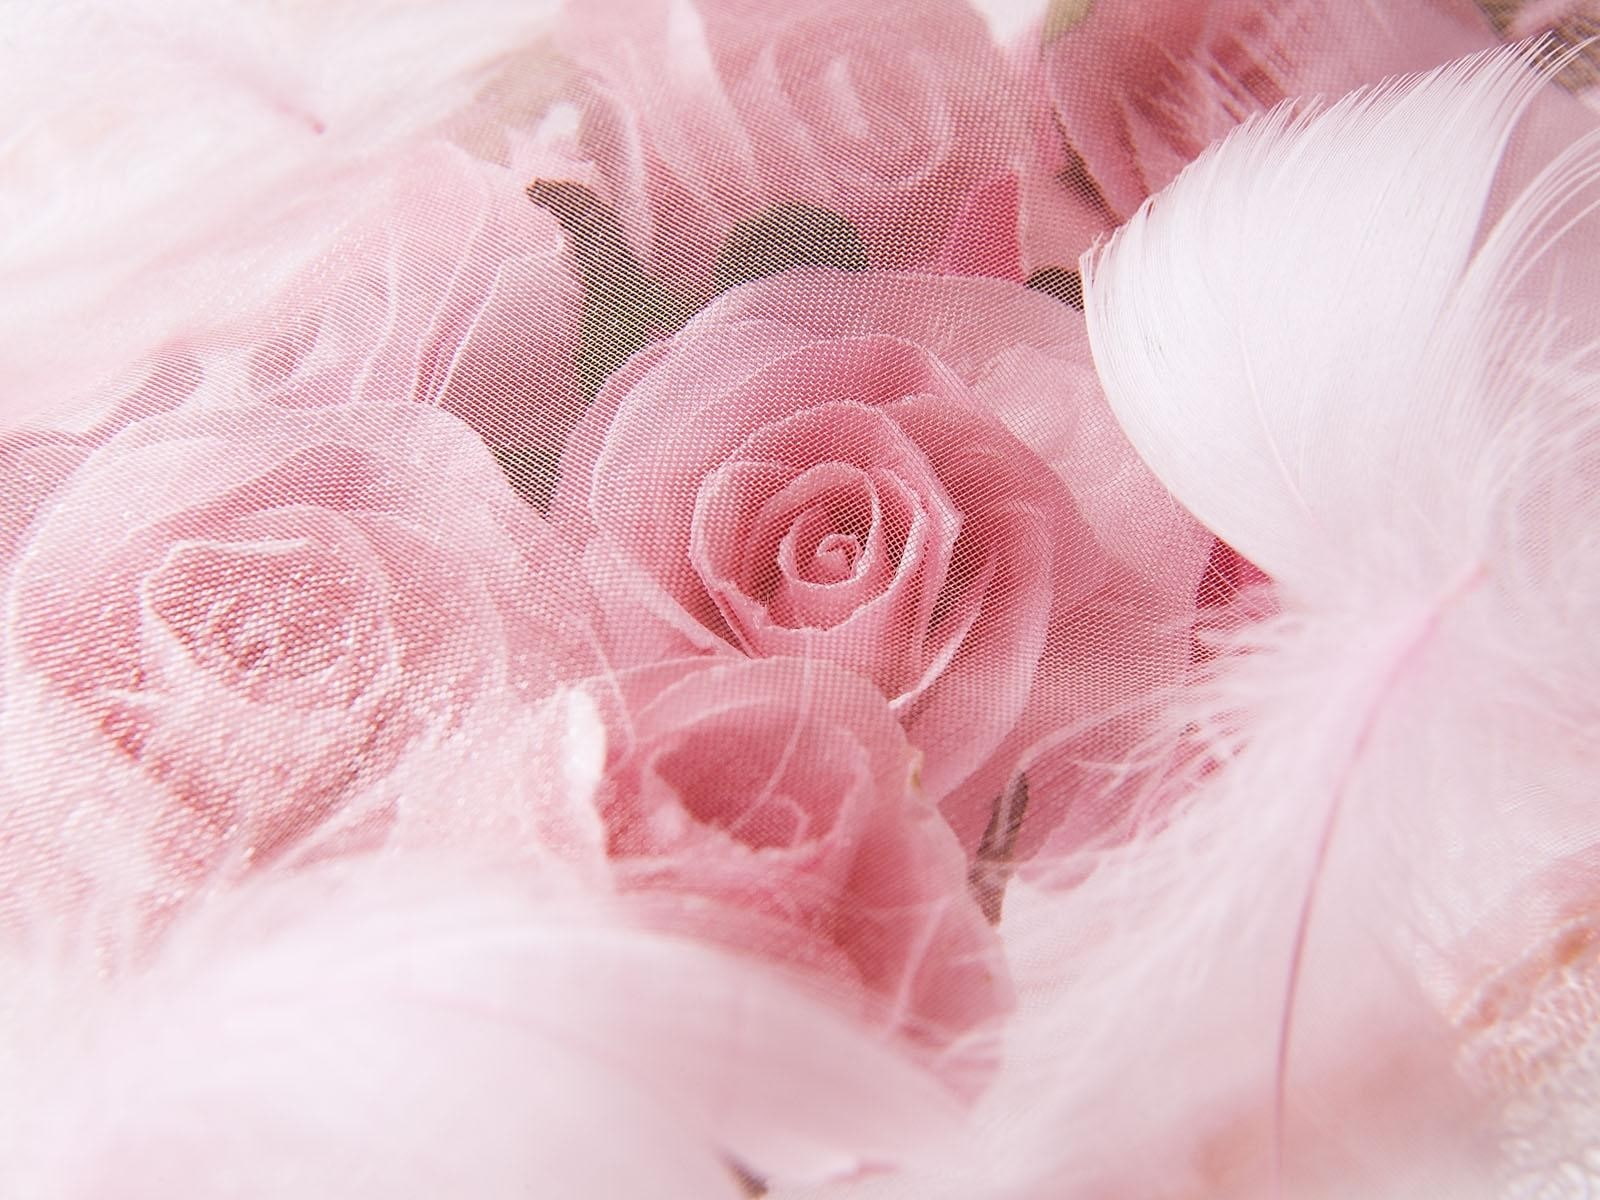 Roses, Flowers, Buds, Net, Feathers, Close-up, pink color, plant